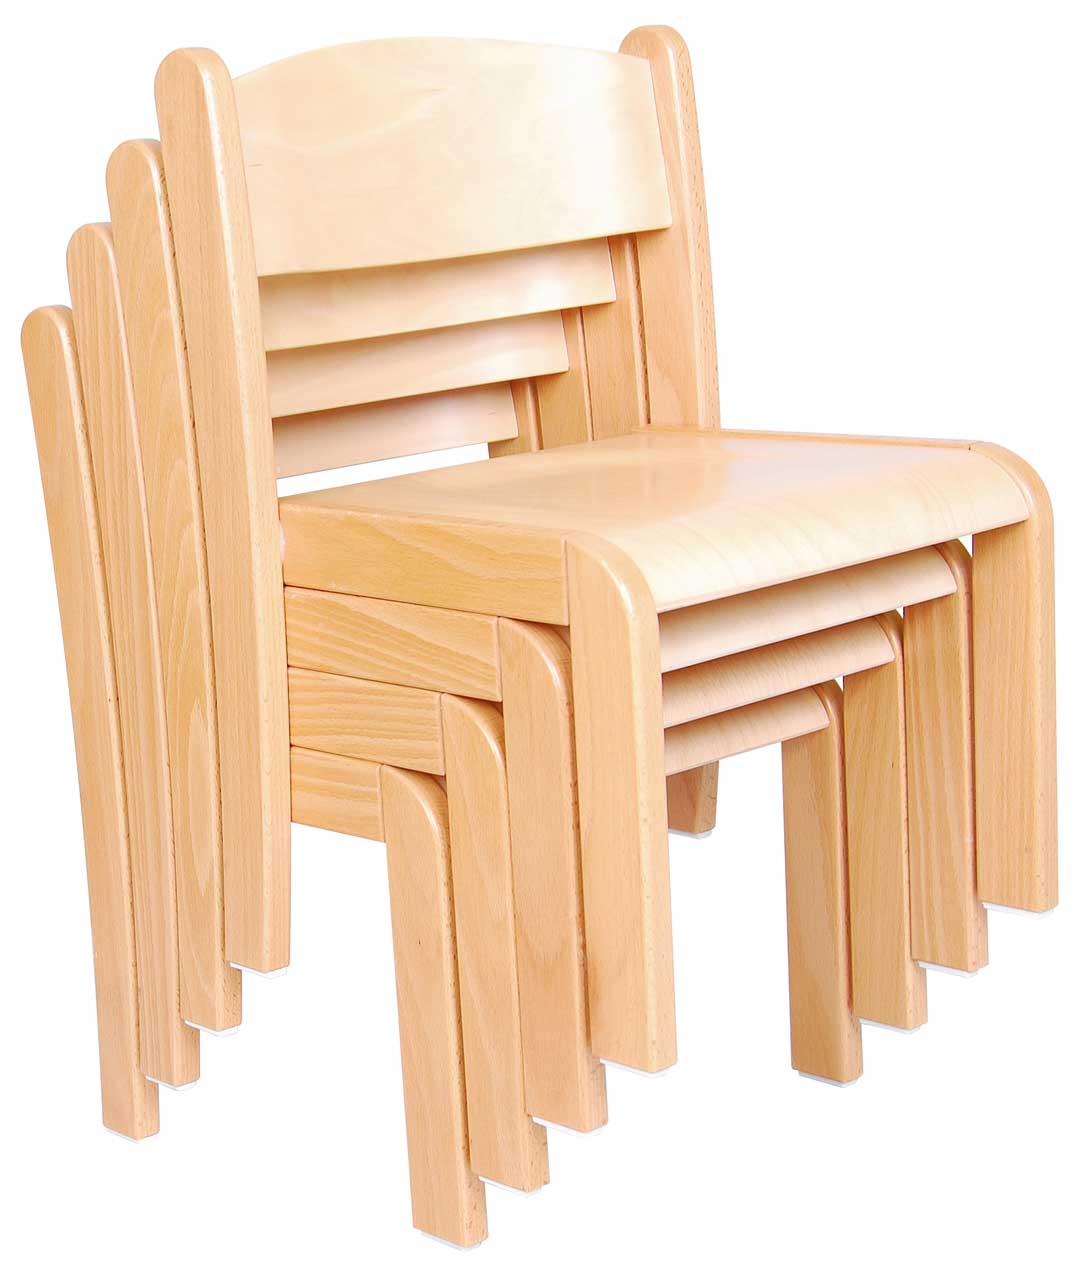 Philip Wooden Chair 35cm All Colours